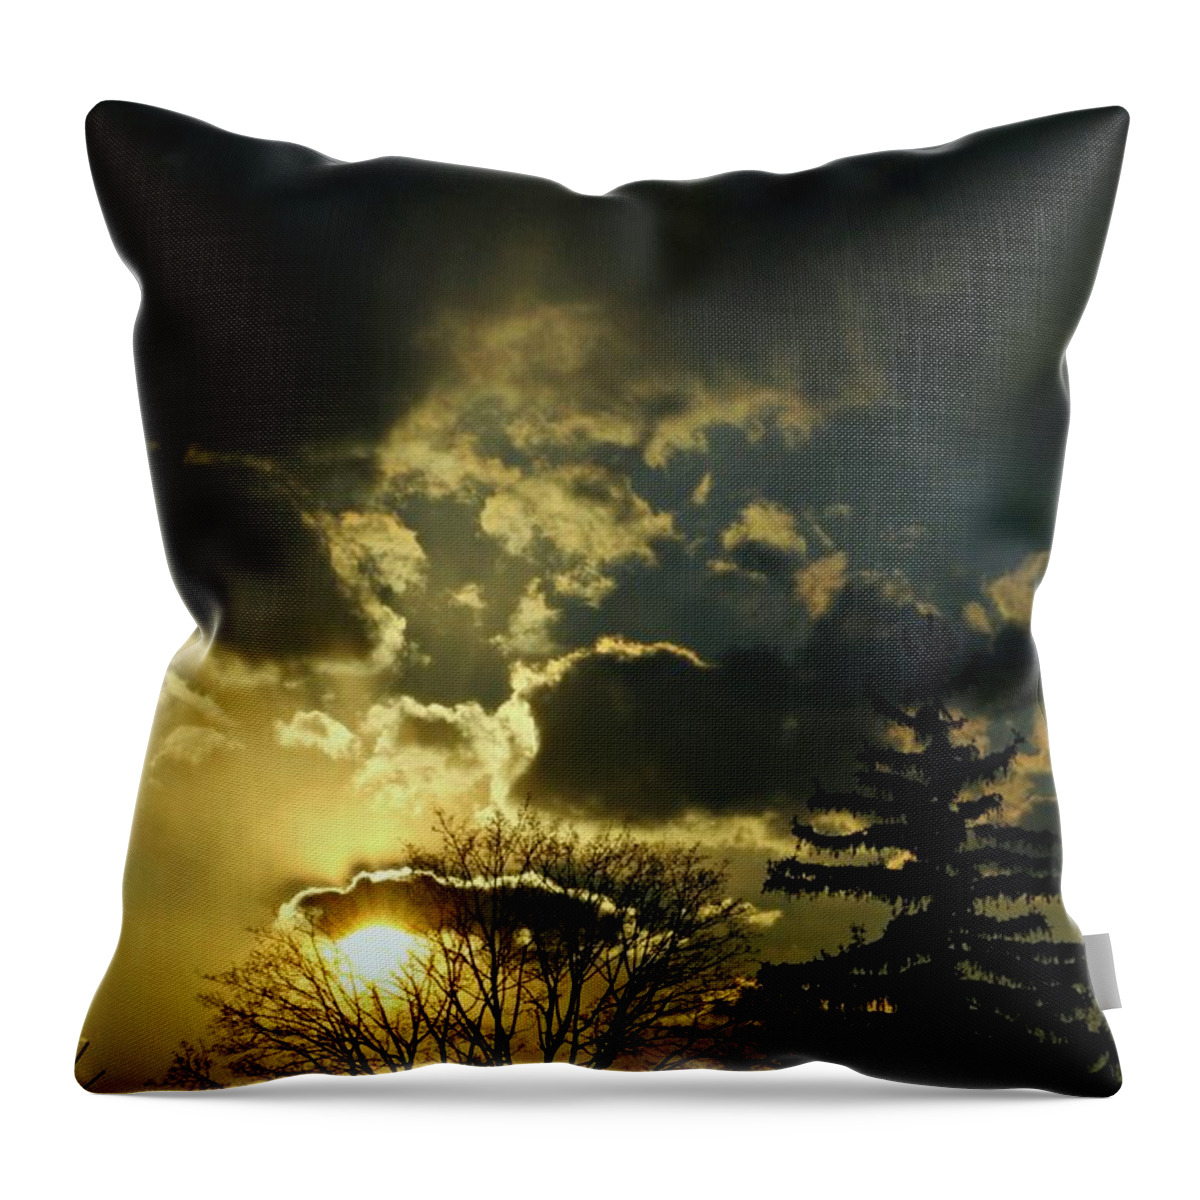 Miscellaneous Throw Pillow featuring the photograph Tonight I Celebrate by Diana Angstadt